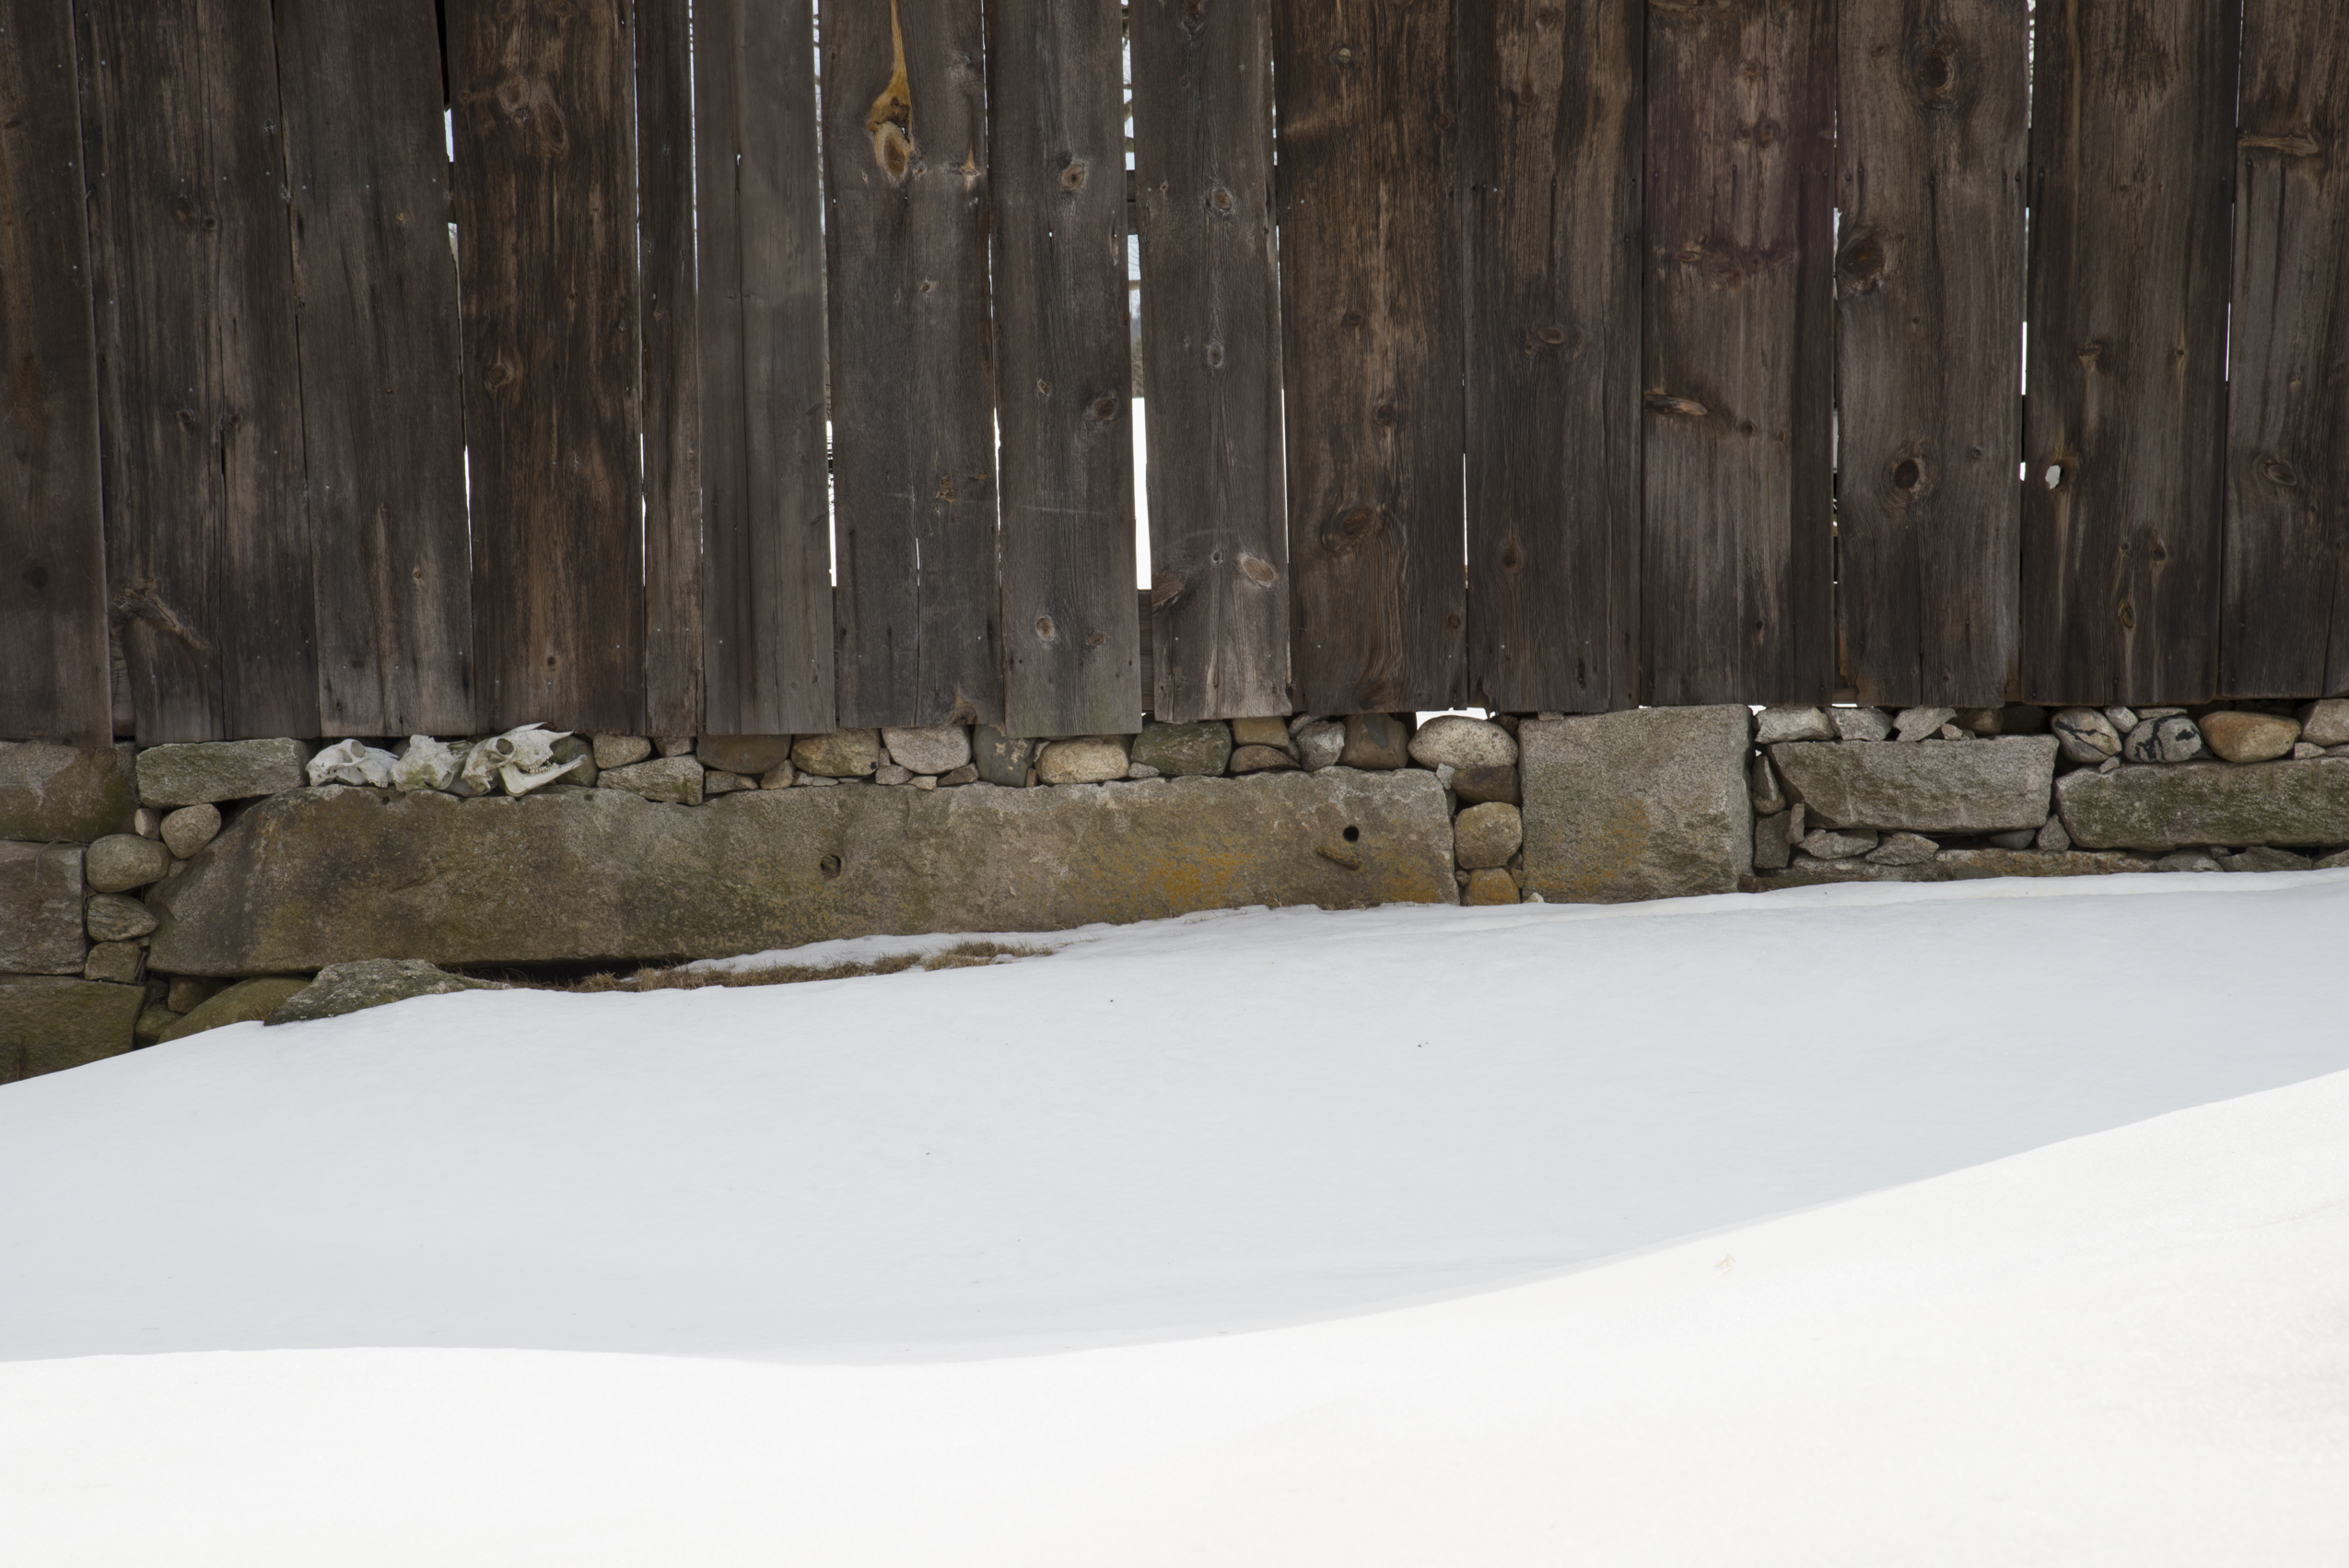 Weathered barn board and a stone foundation in fresh snow at the Shaker village.